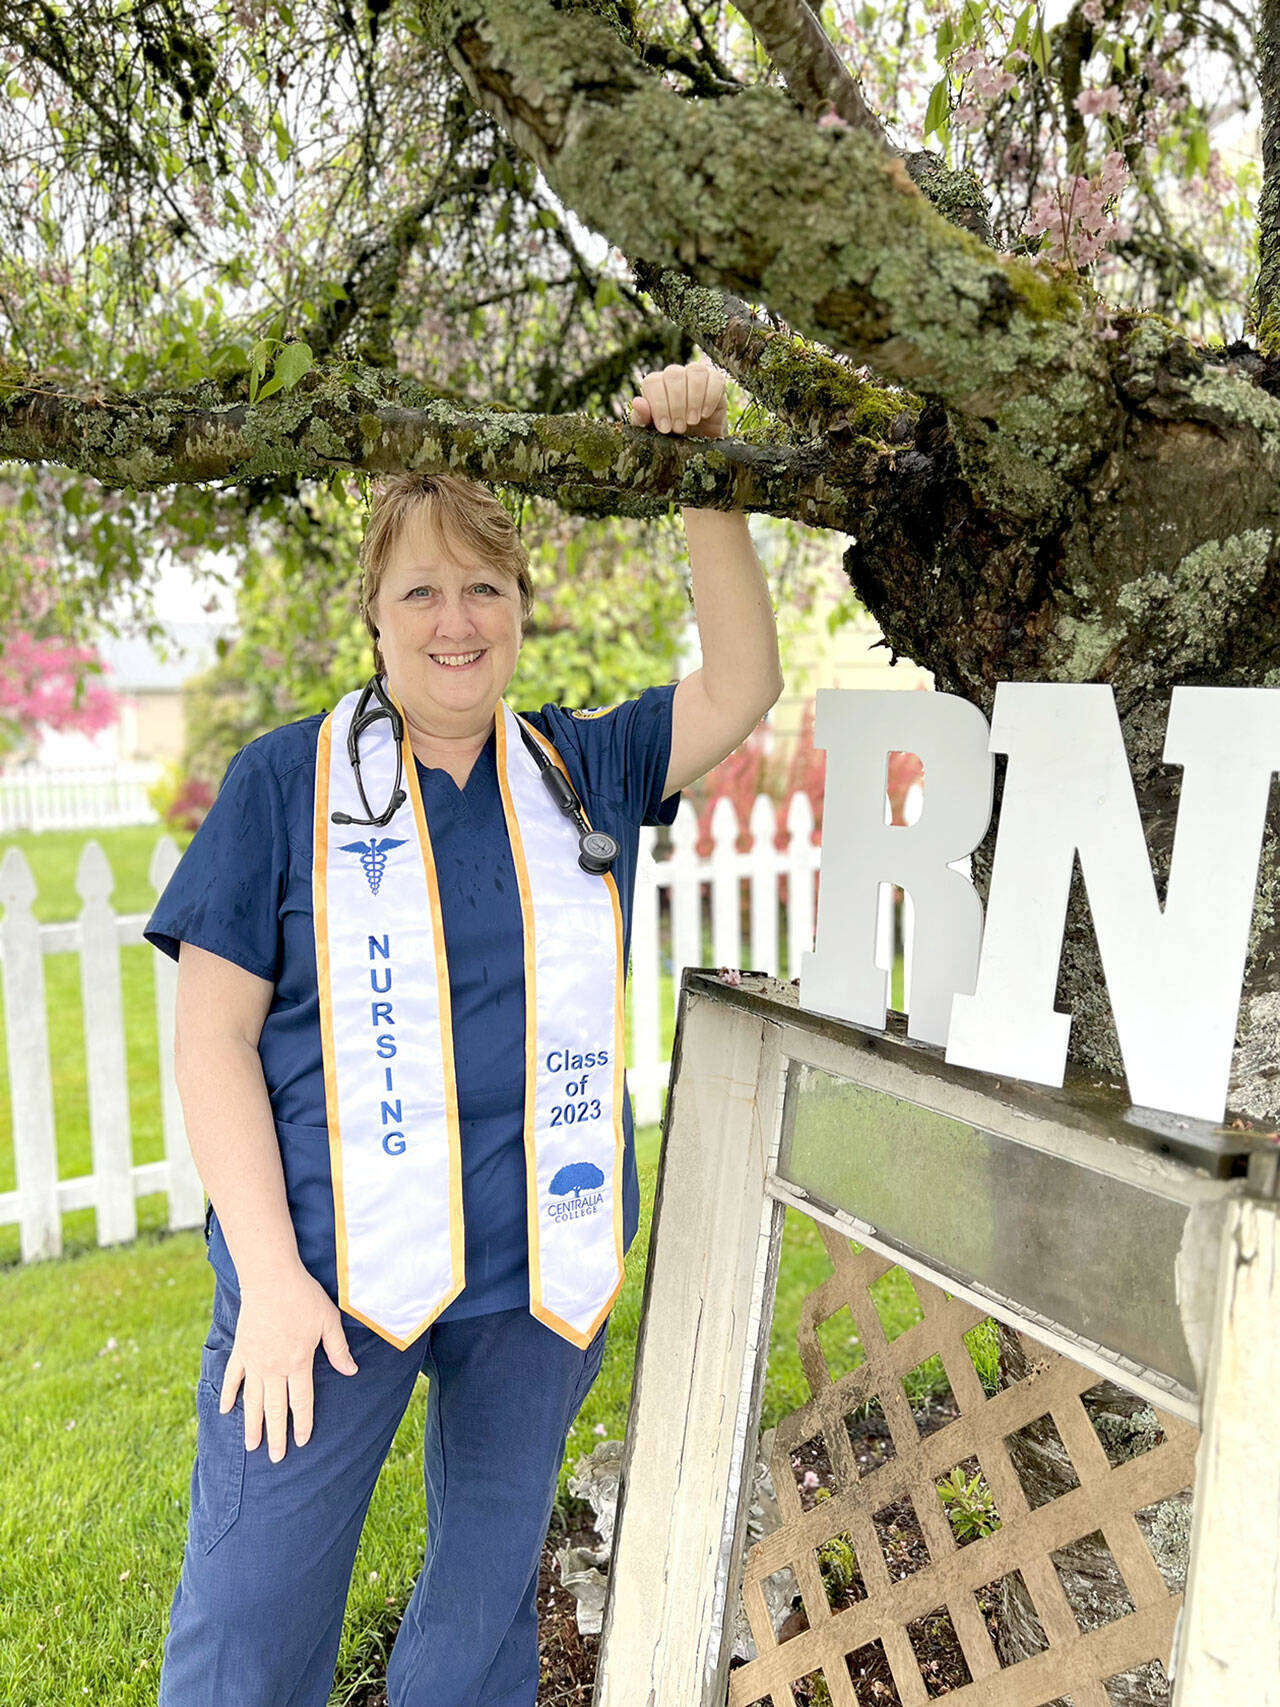 Christy E. Nelson is set to graduate, with honors, from Centralia College